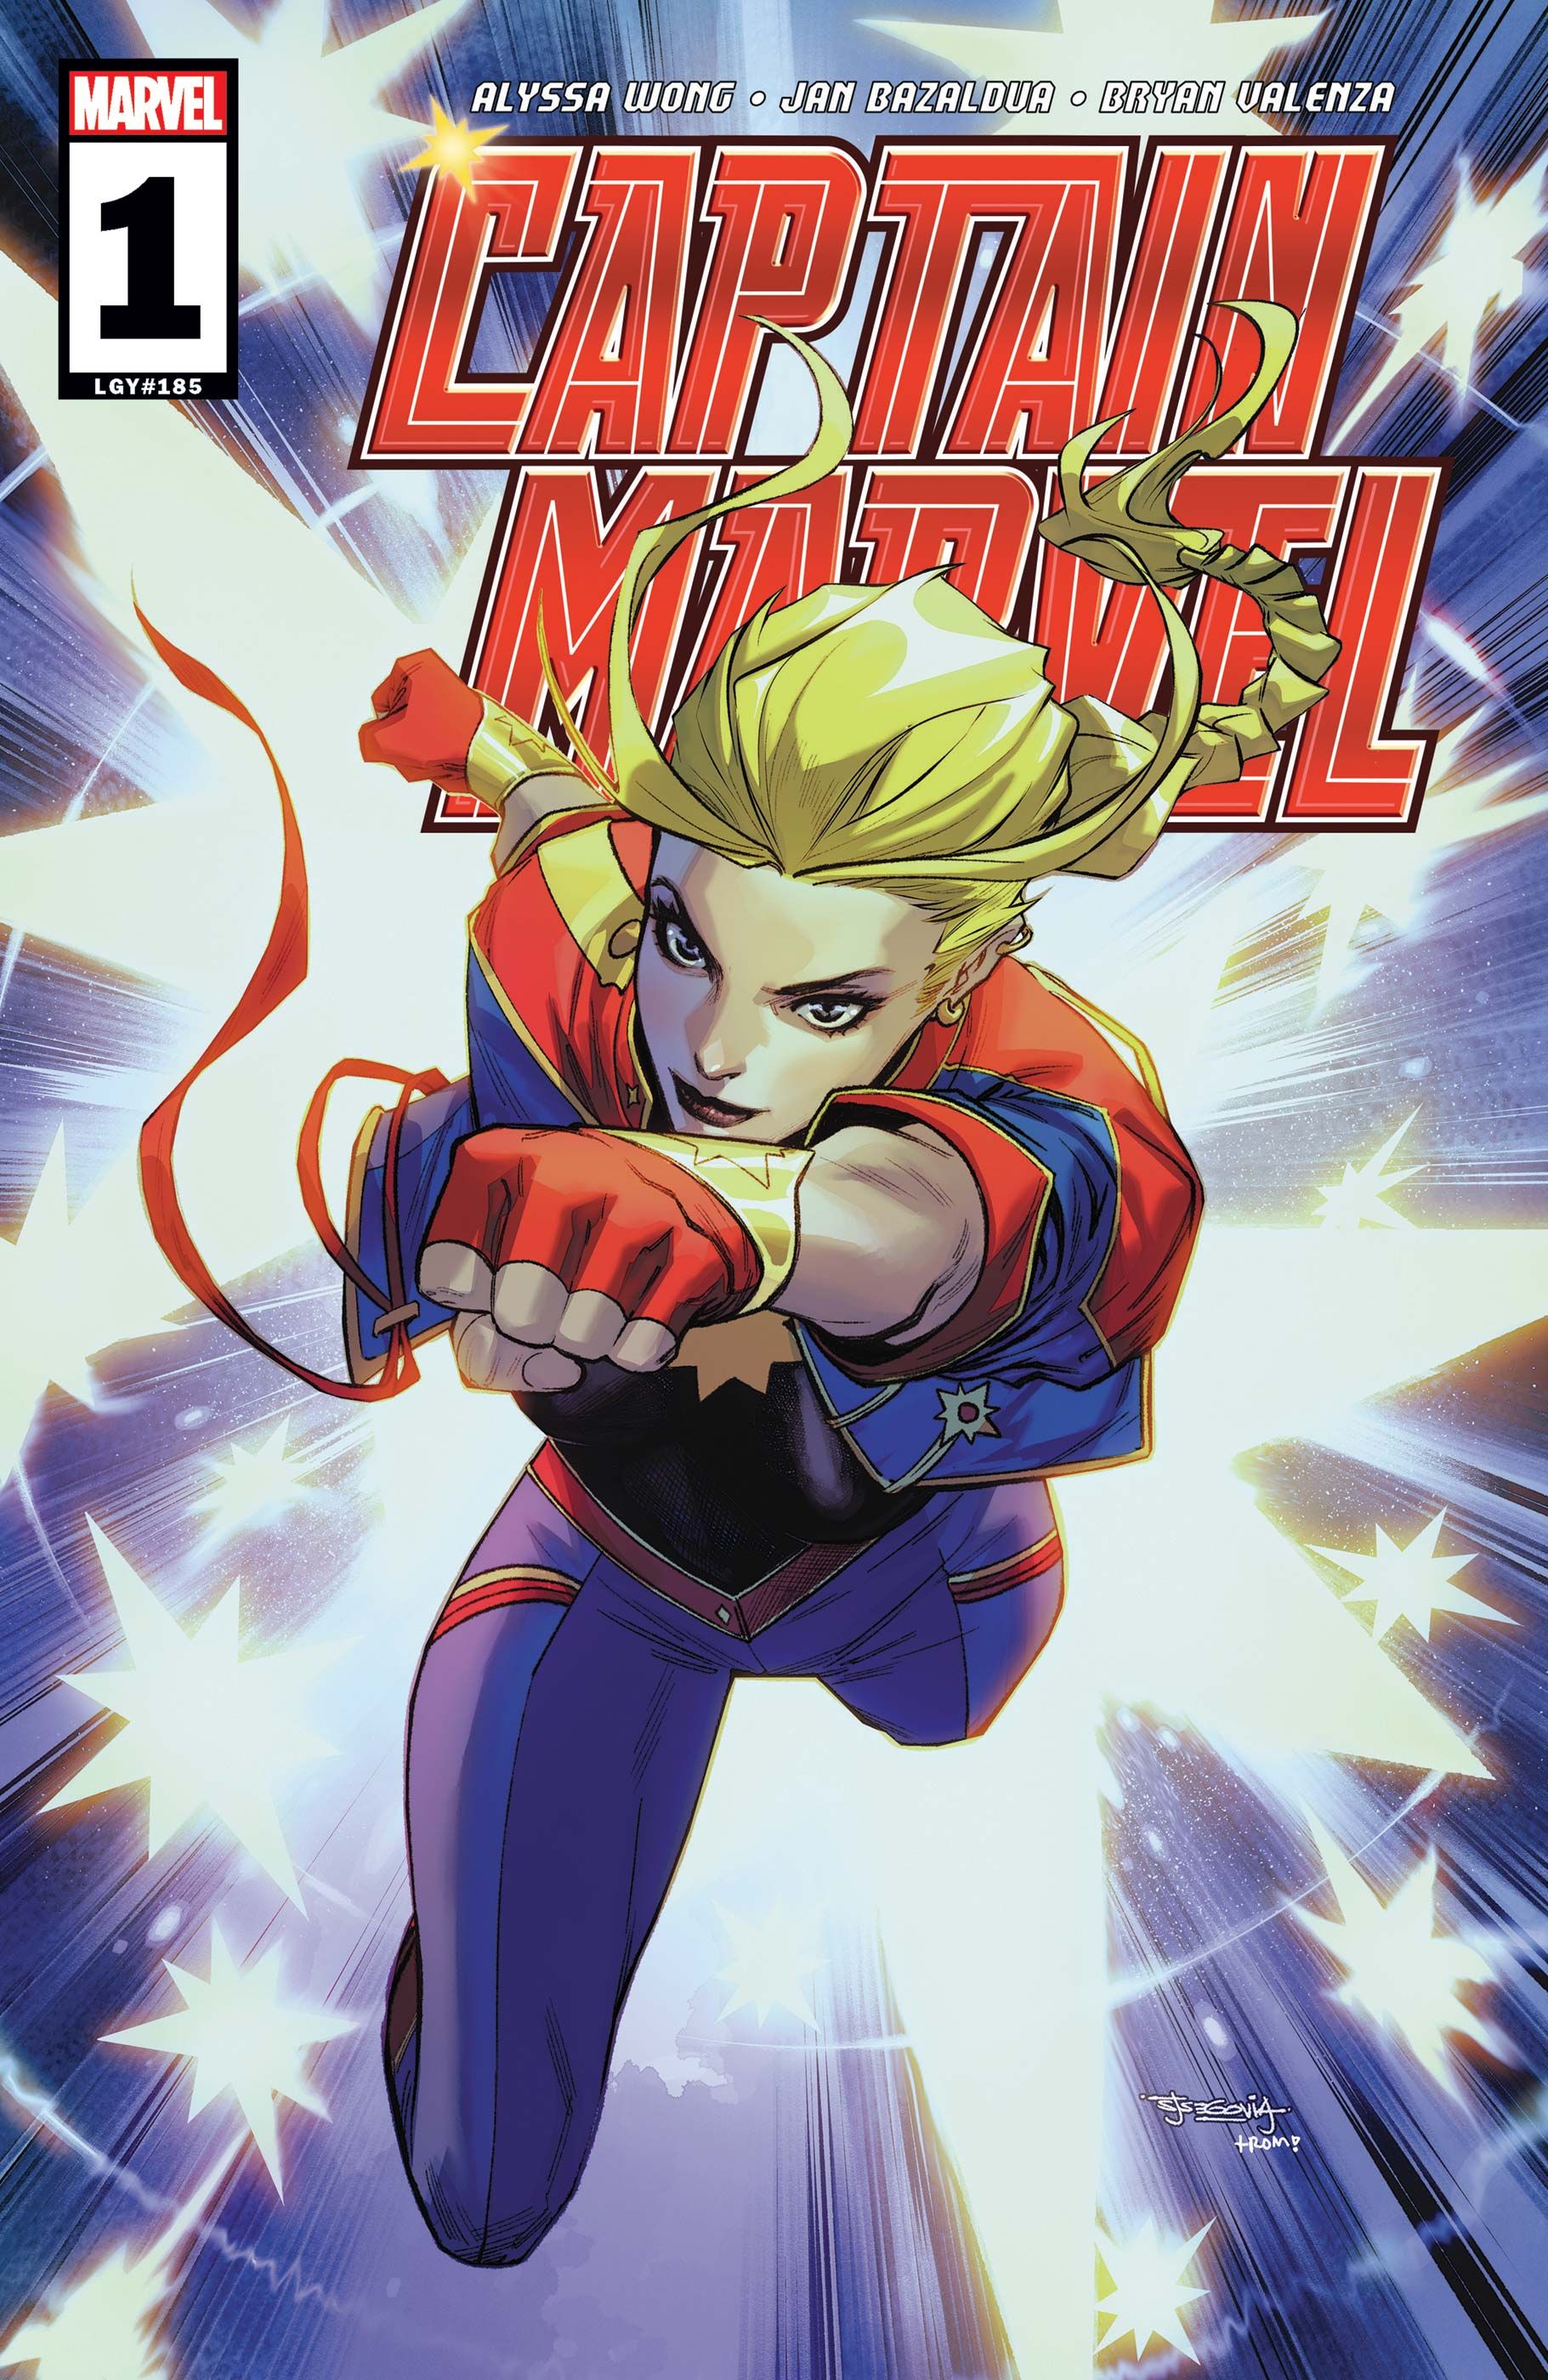 Carol Danvers throws a punch while flying in Captain Marvel #1 by Marvel Comics